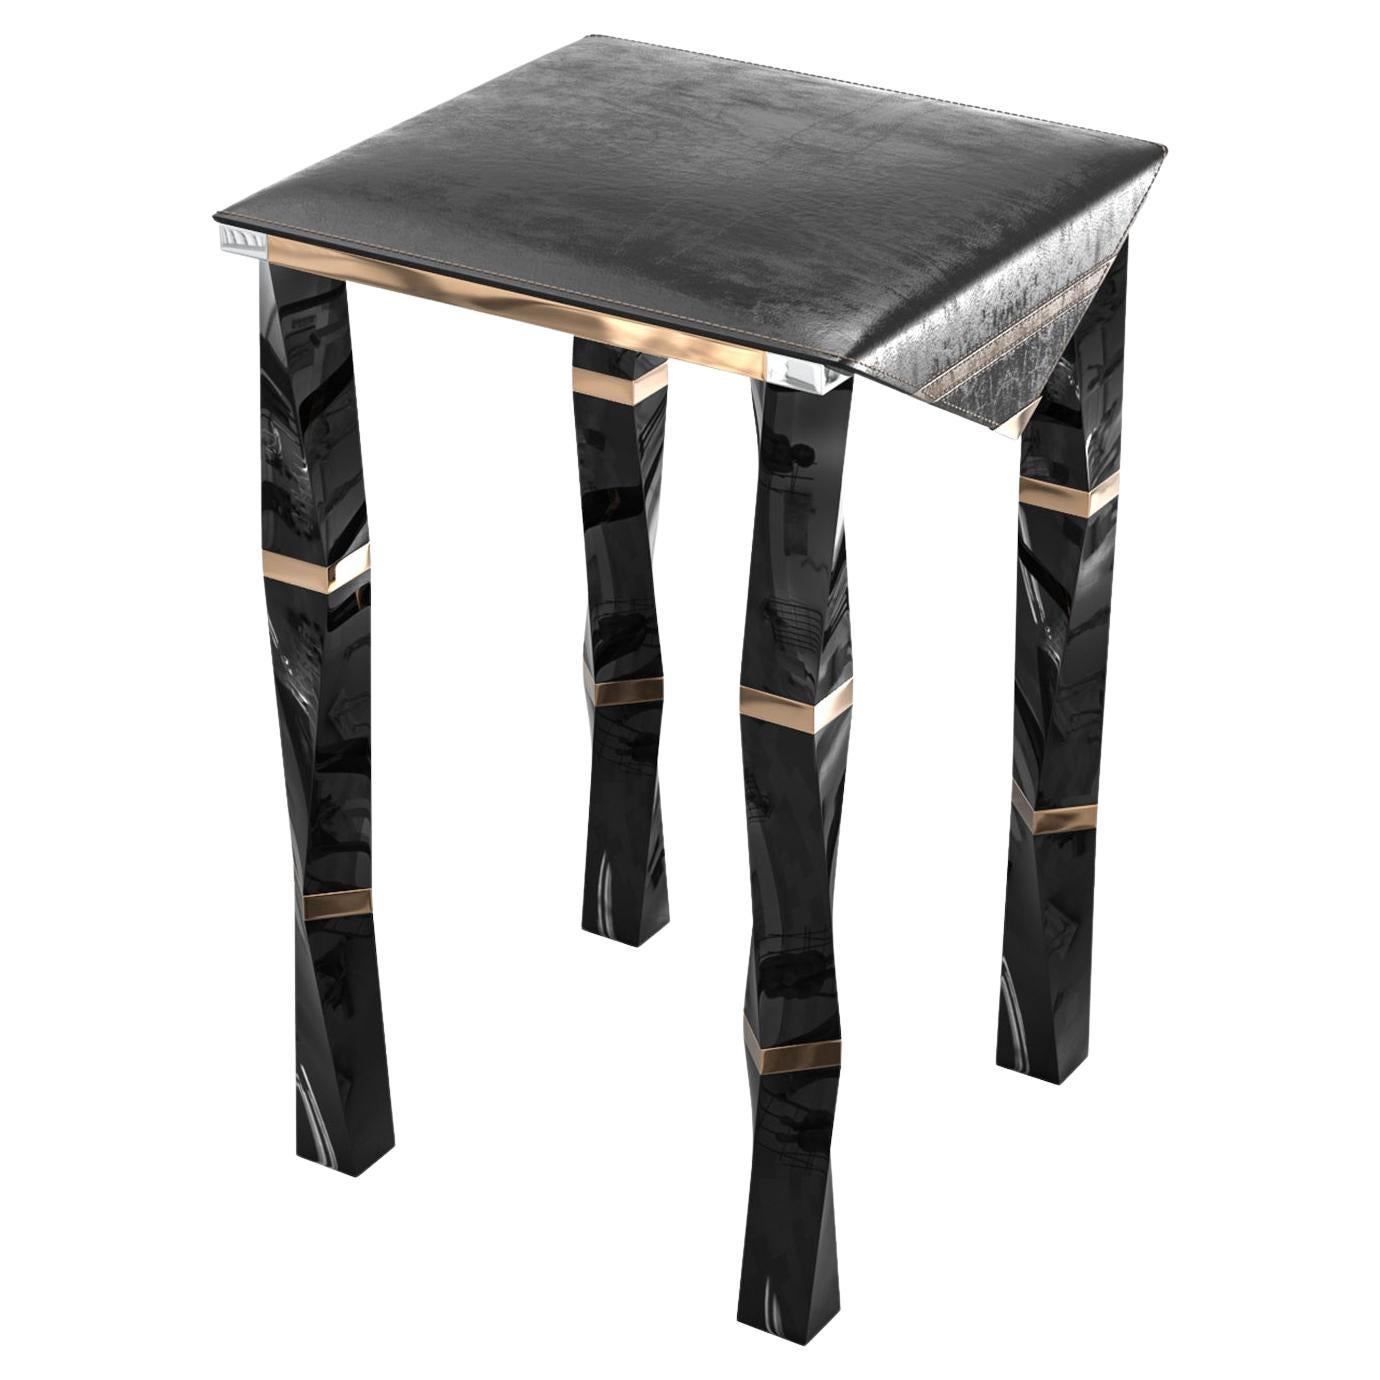 "Puledri" Bar Stool with Stainless Steel and Bronze, Istanbul For Sale